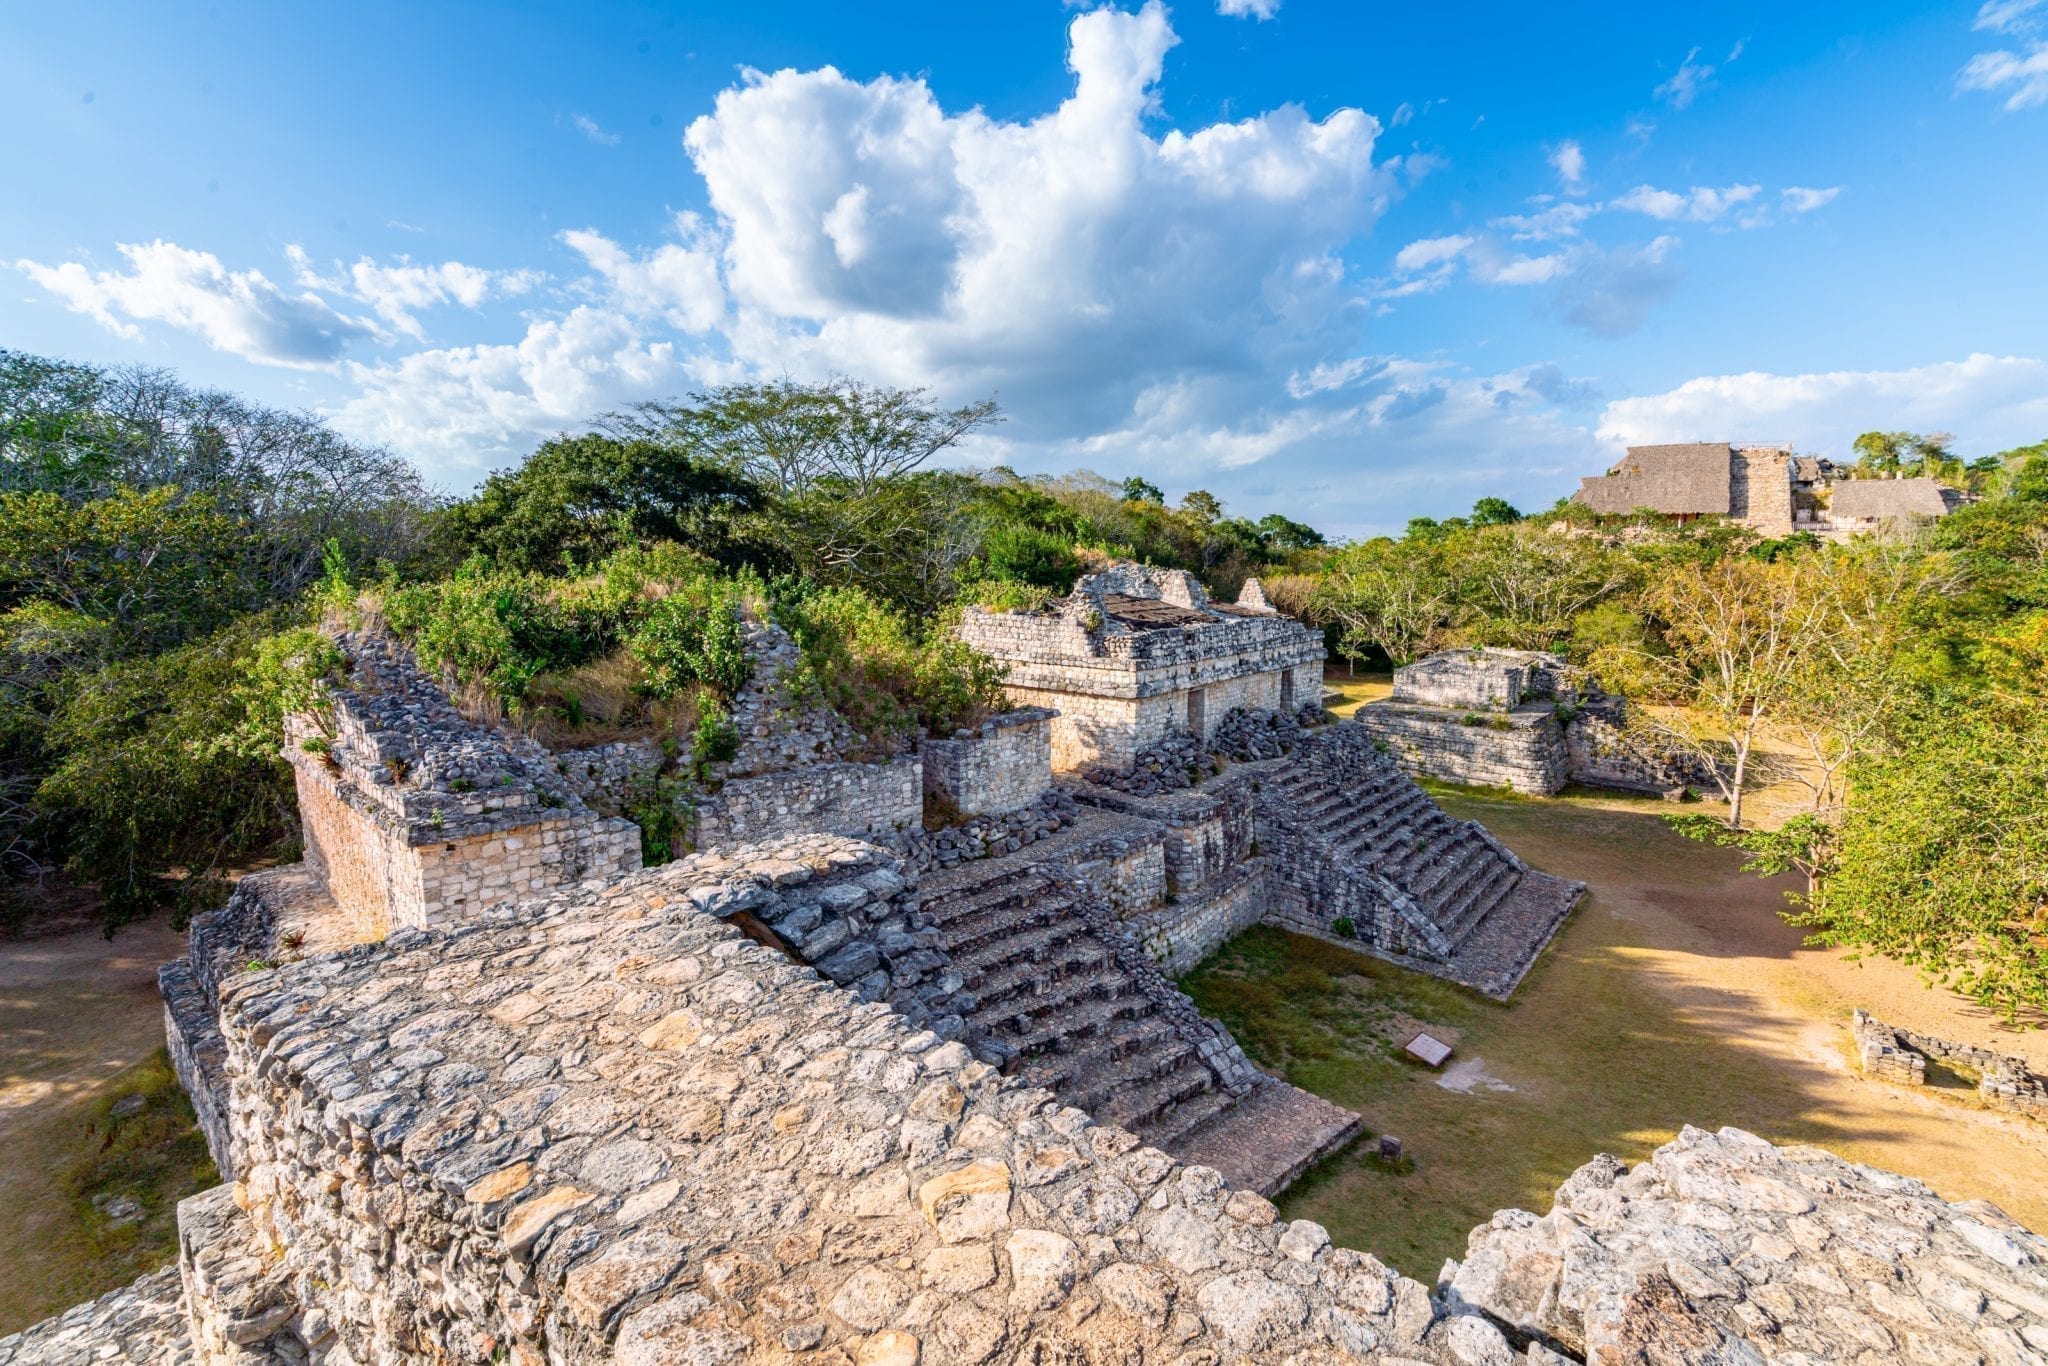 Ek Balam Mayan ruins as seen from above with el torre in the background